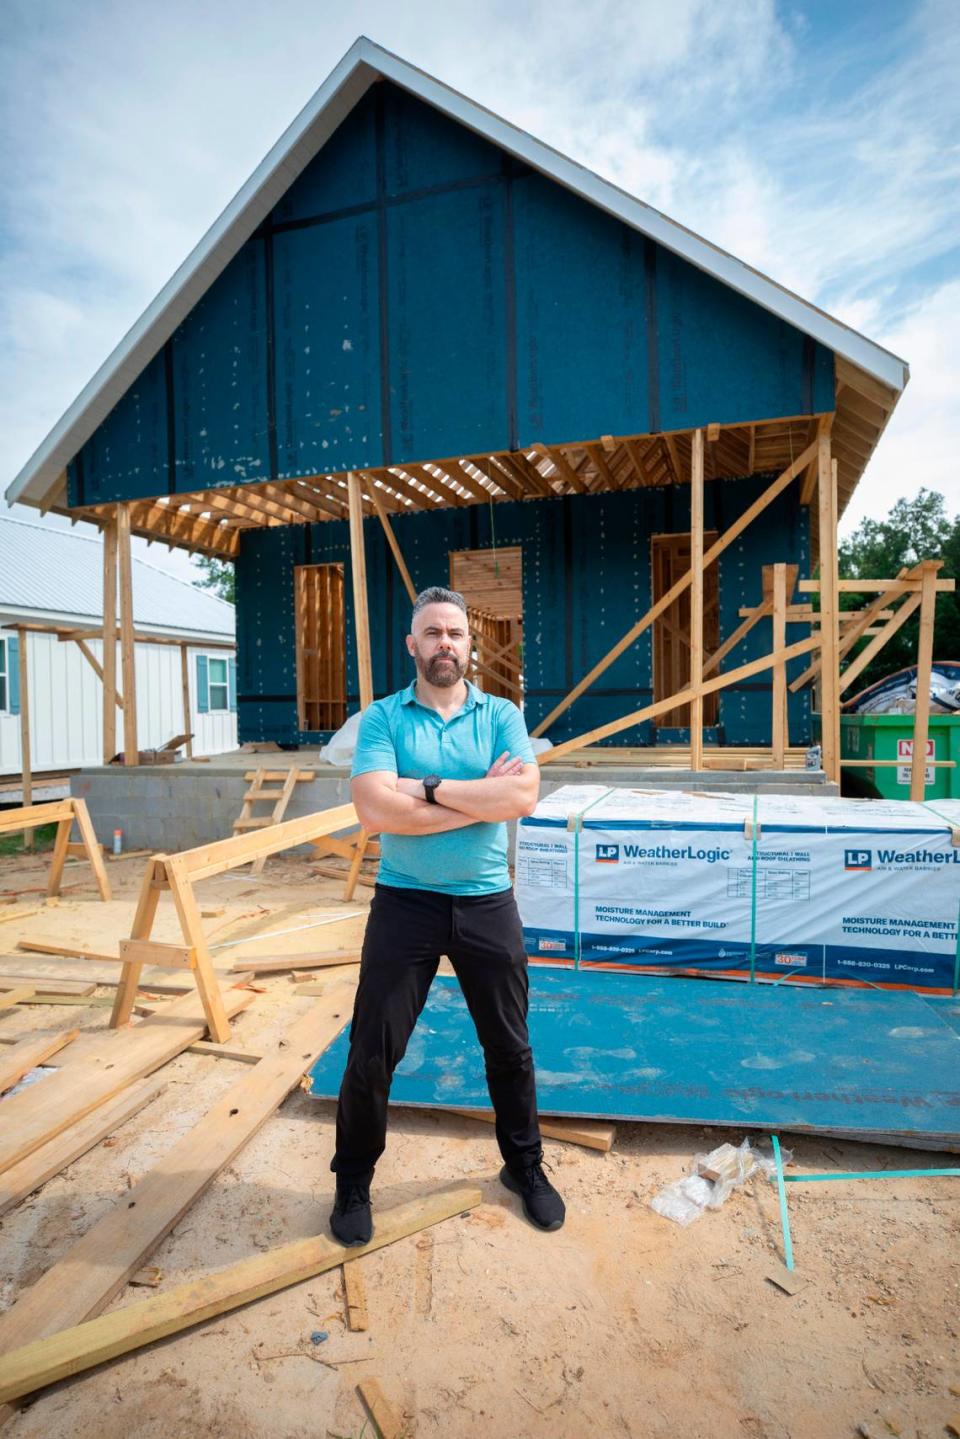 Josh Morgerman, a worldwide storm chaser who travels to the eye of hurricanes, is building a home in Old Town Bay St. Louis. The shotgun style house will have a New Orleans feel and will be built to withstand hurricane-force winds. Justin Mitchell/Sun Herald